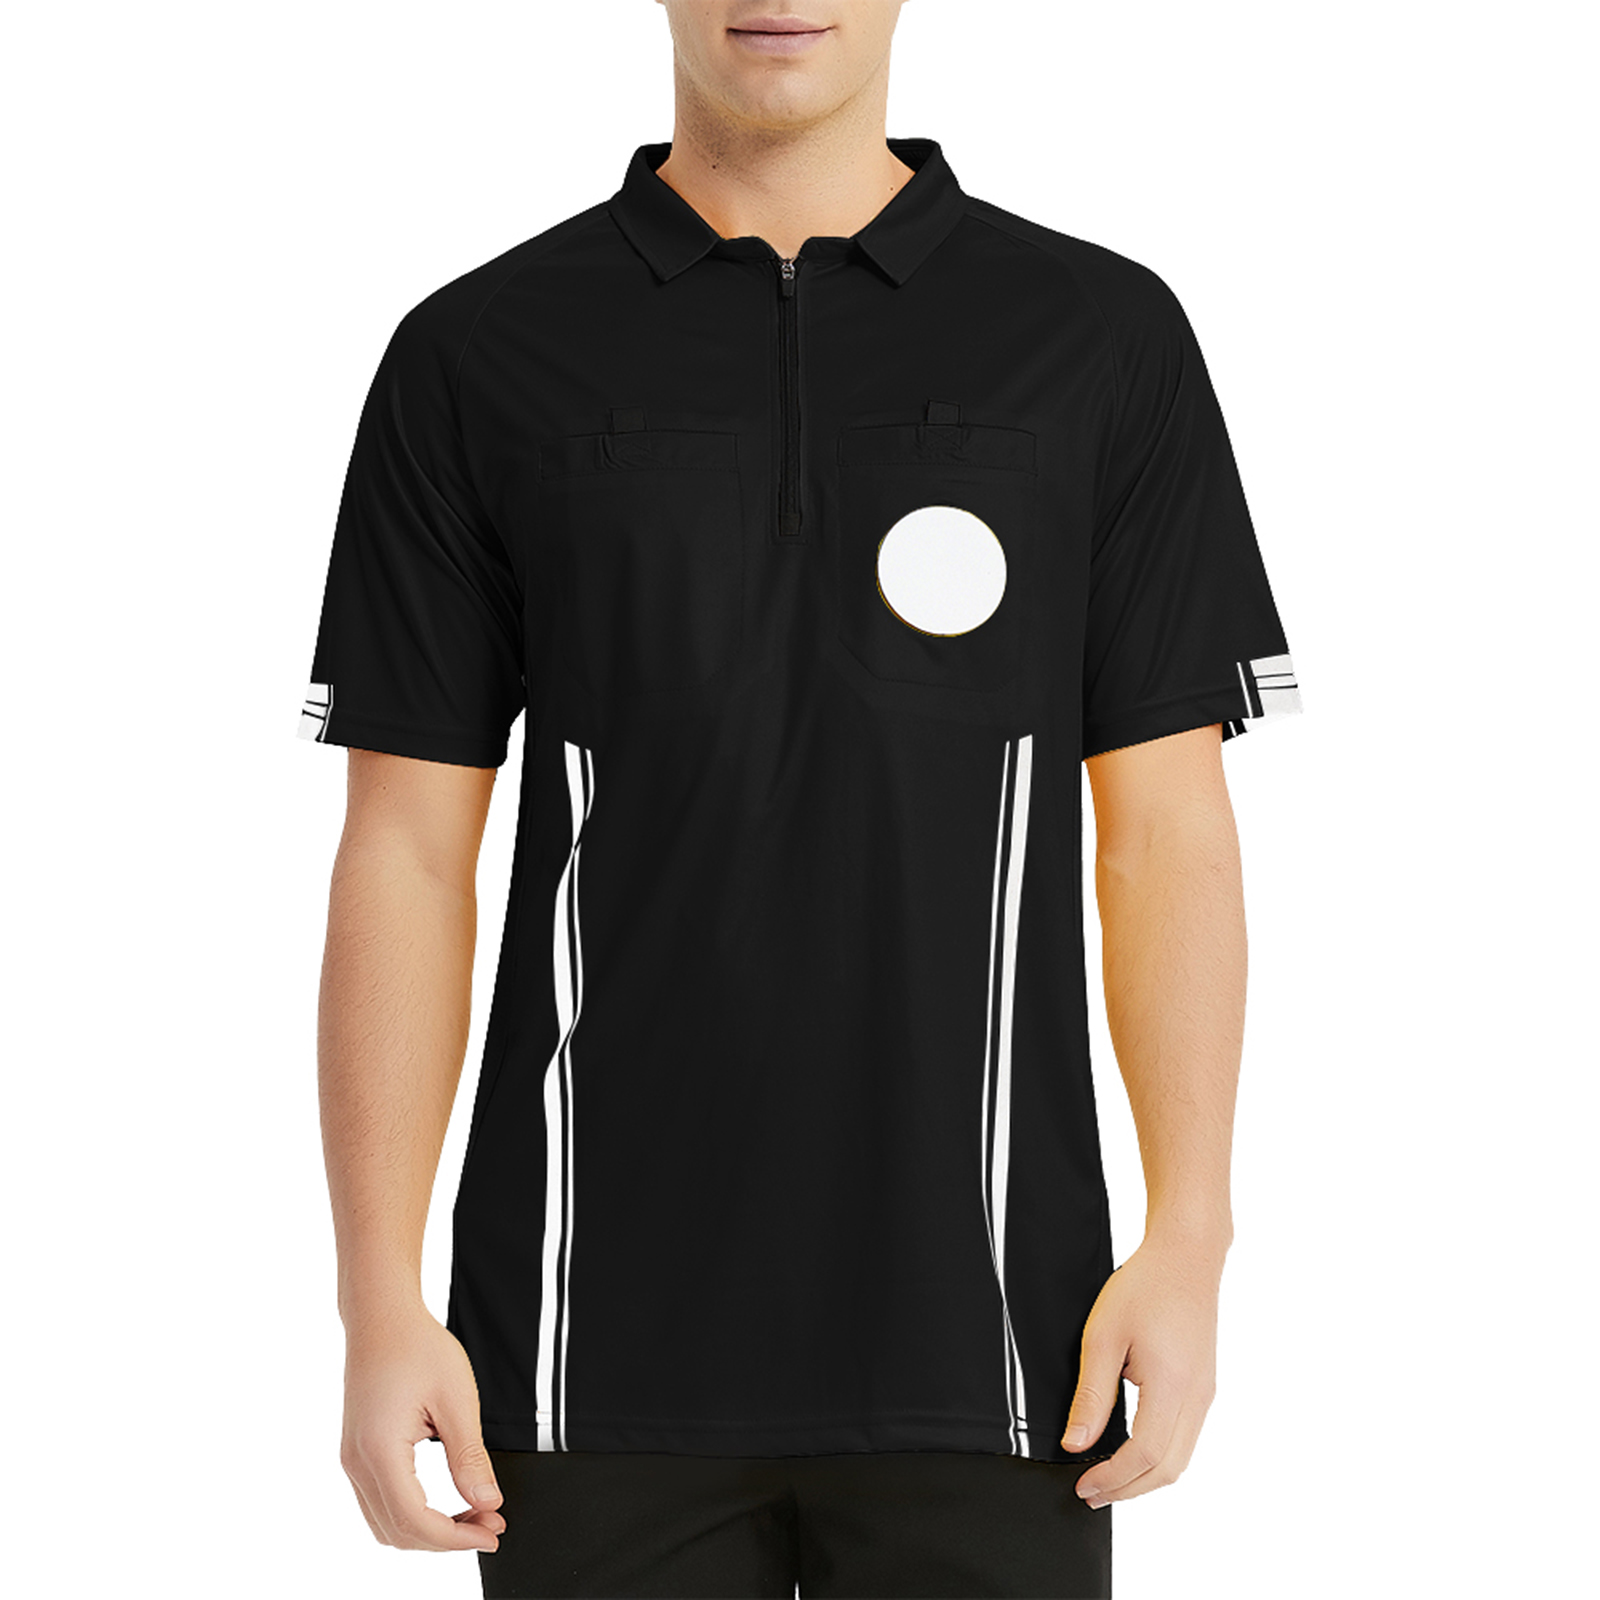 TOPTIE Men's Soccer Referee Jersey Officials Pro Short Sleeve Referee Shirts  Sale, Reviews. - Opentip